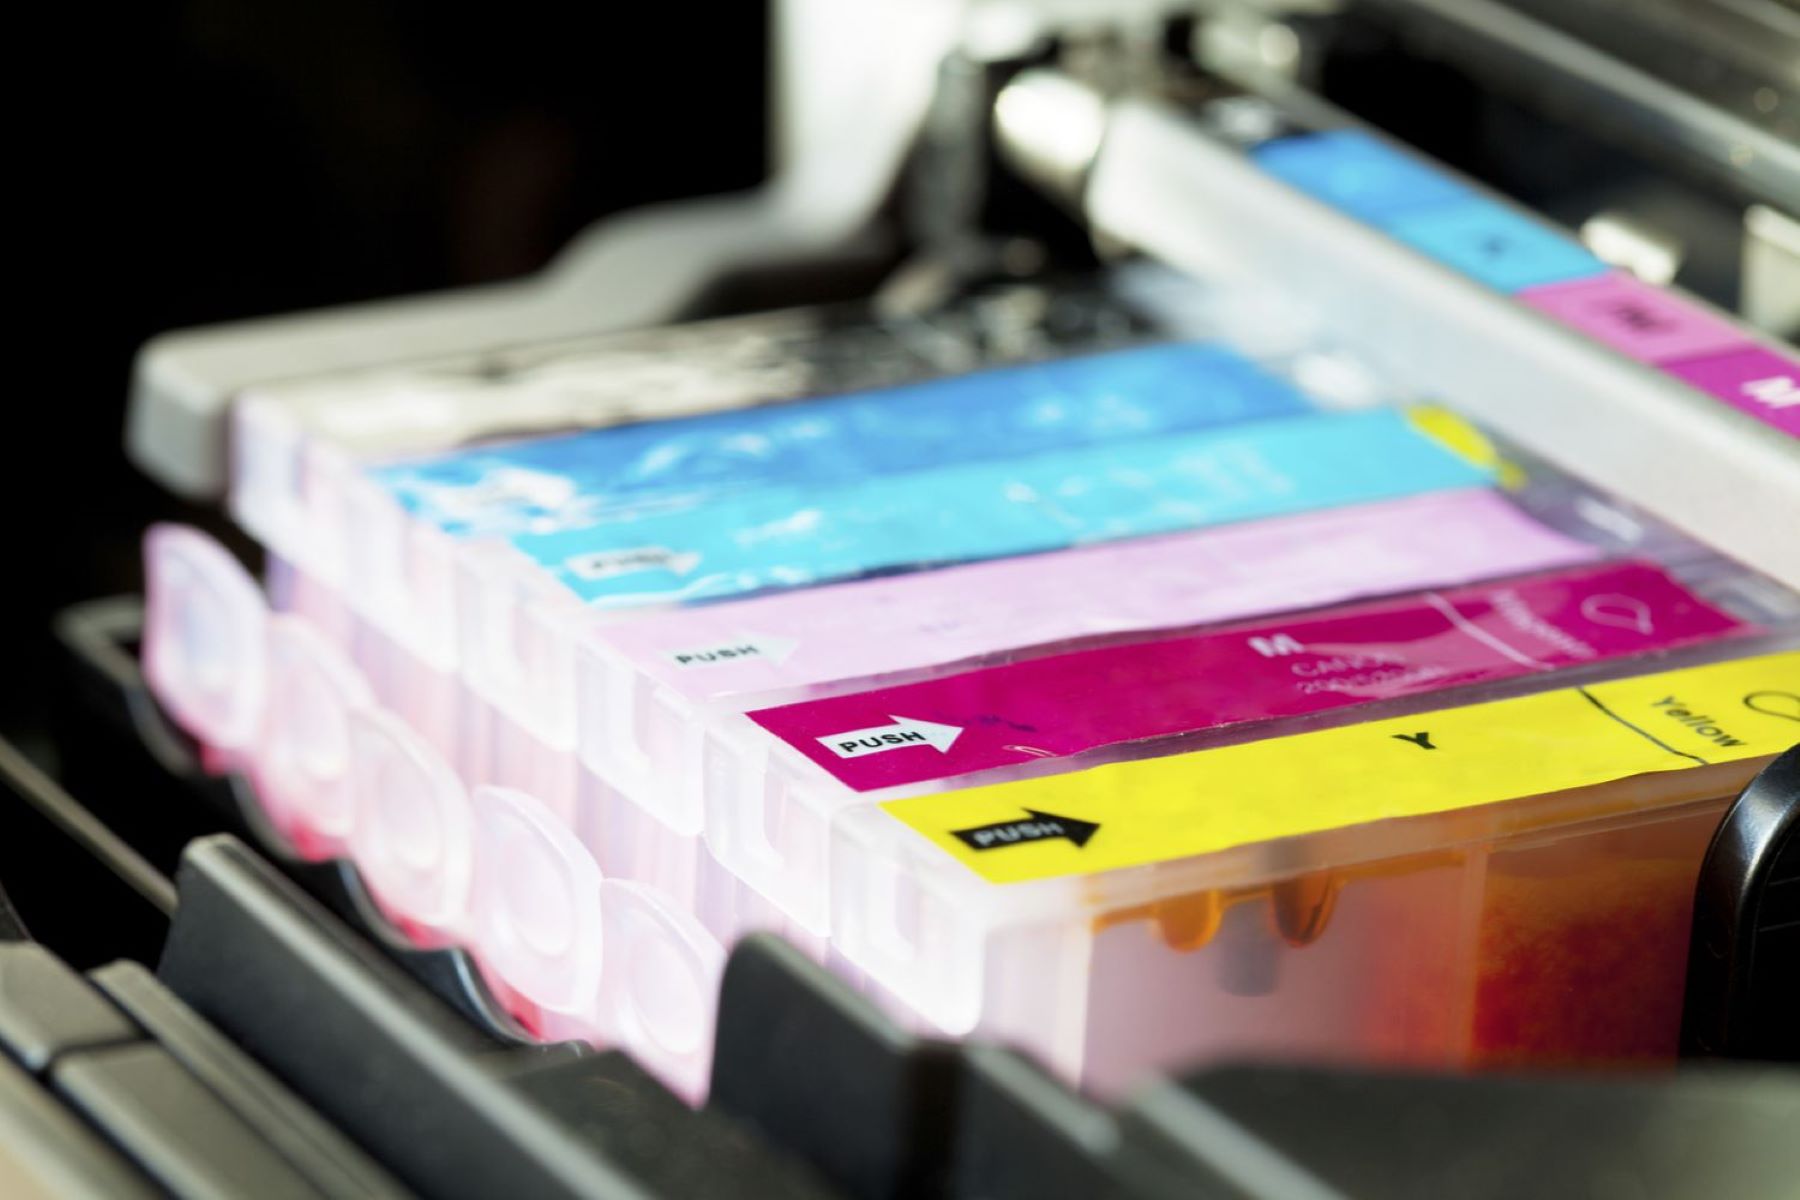 How To Refill A Printer Ink Cartridge